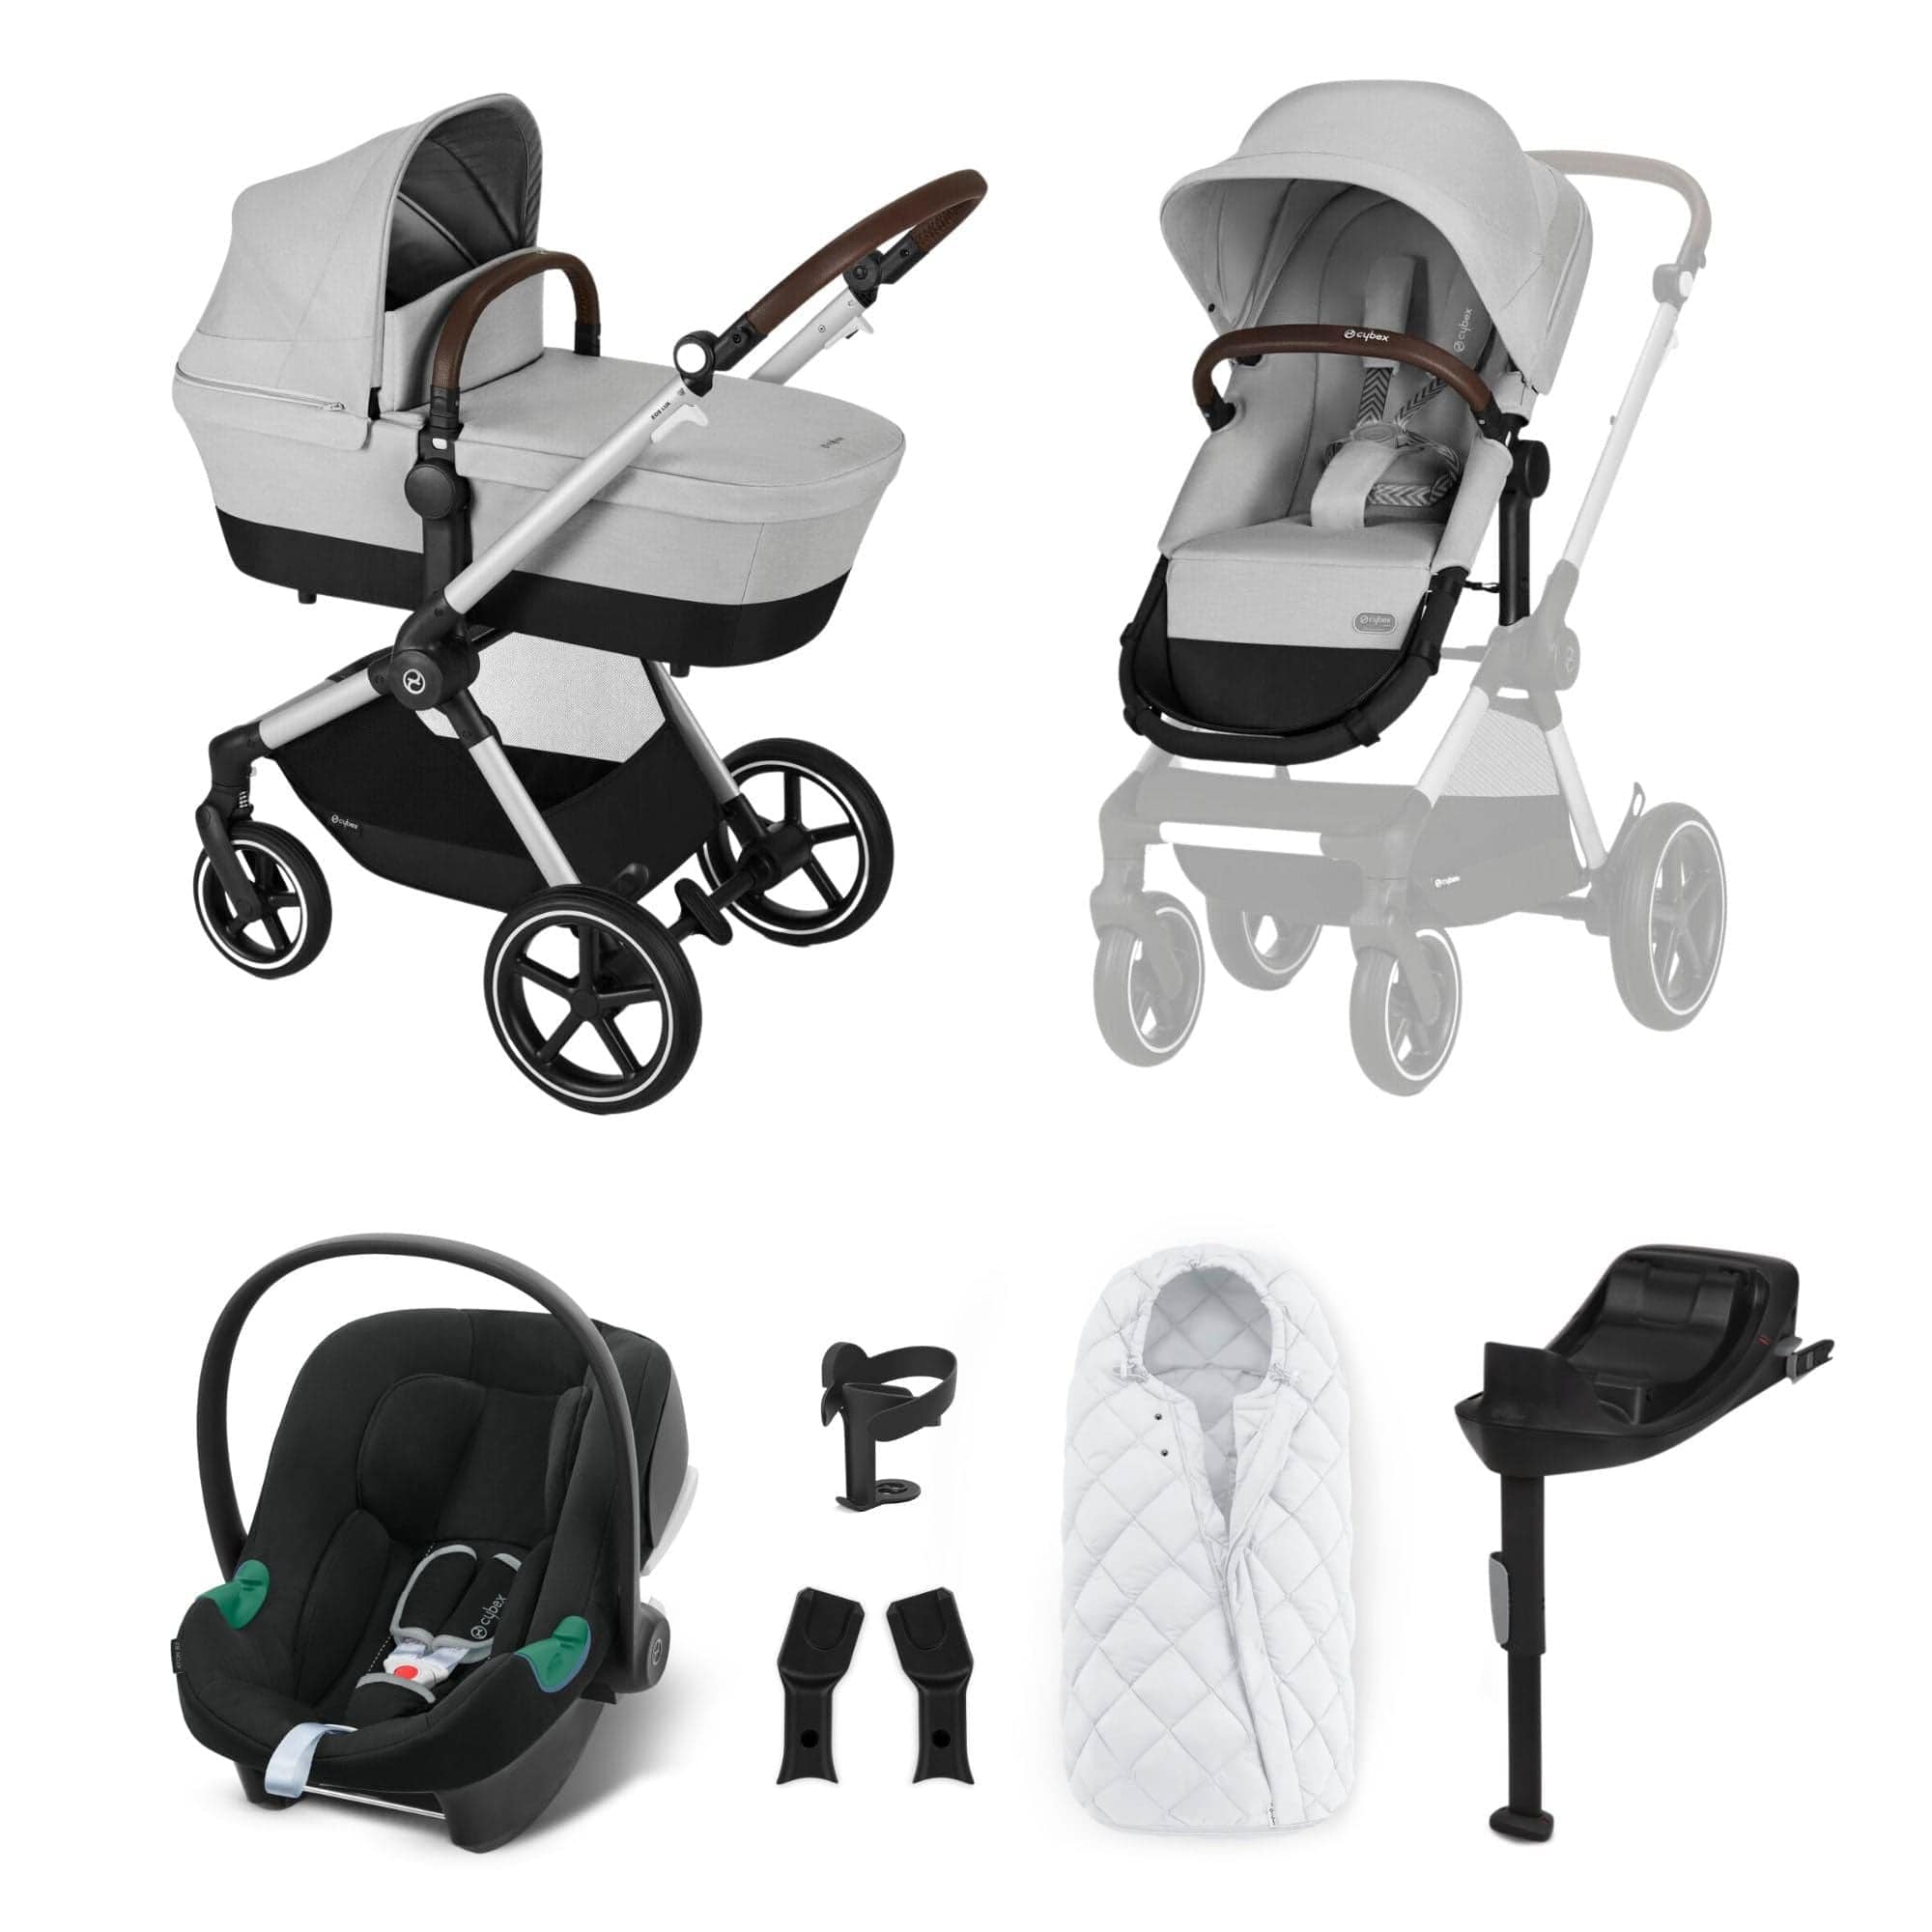 Cybex Eos Lux Comfort 9 Piece Bundle in Lava Grey Travel Systems 14530-SLV-LAV-GRY 4063846368563